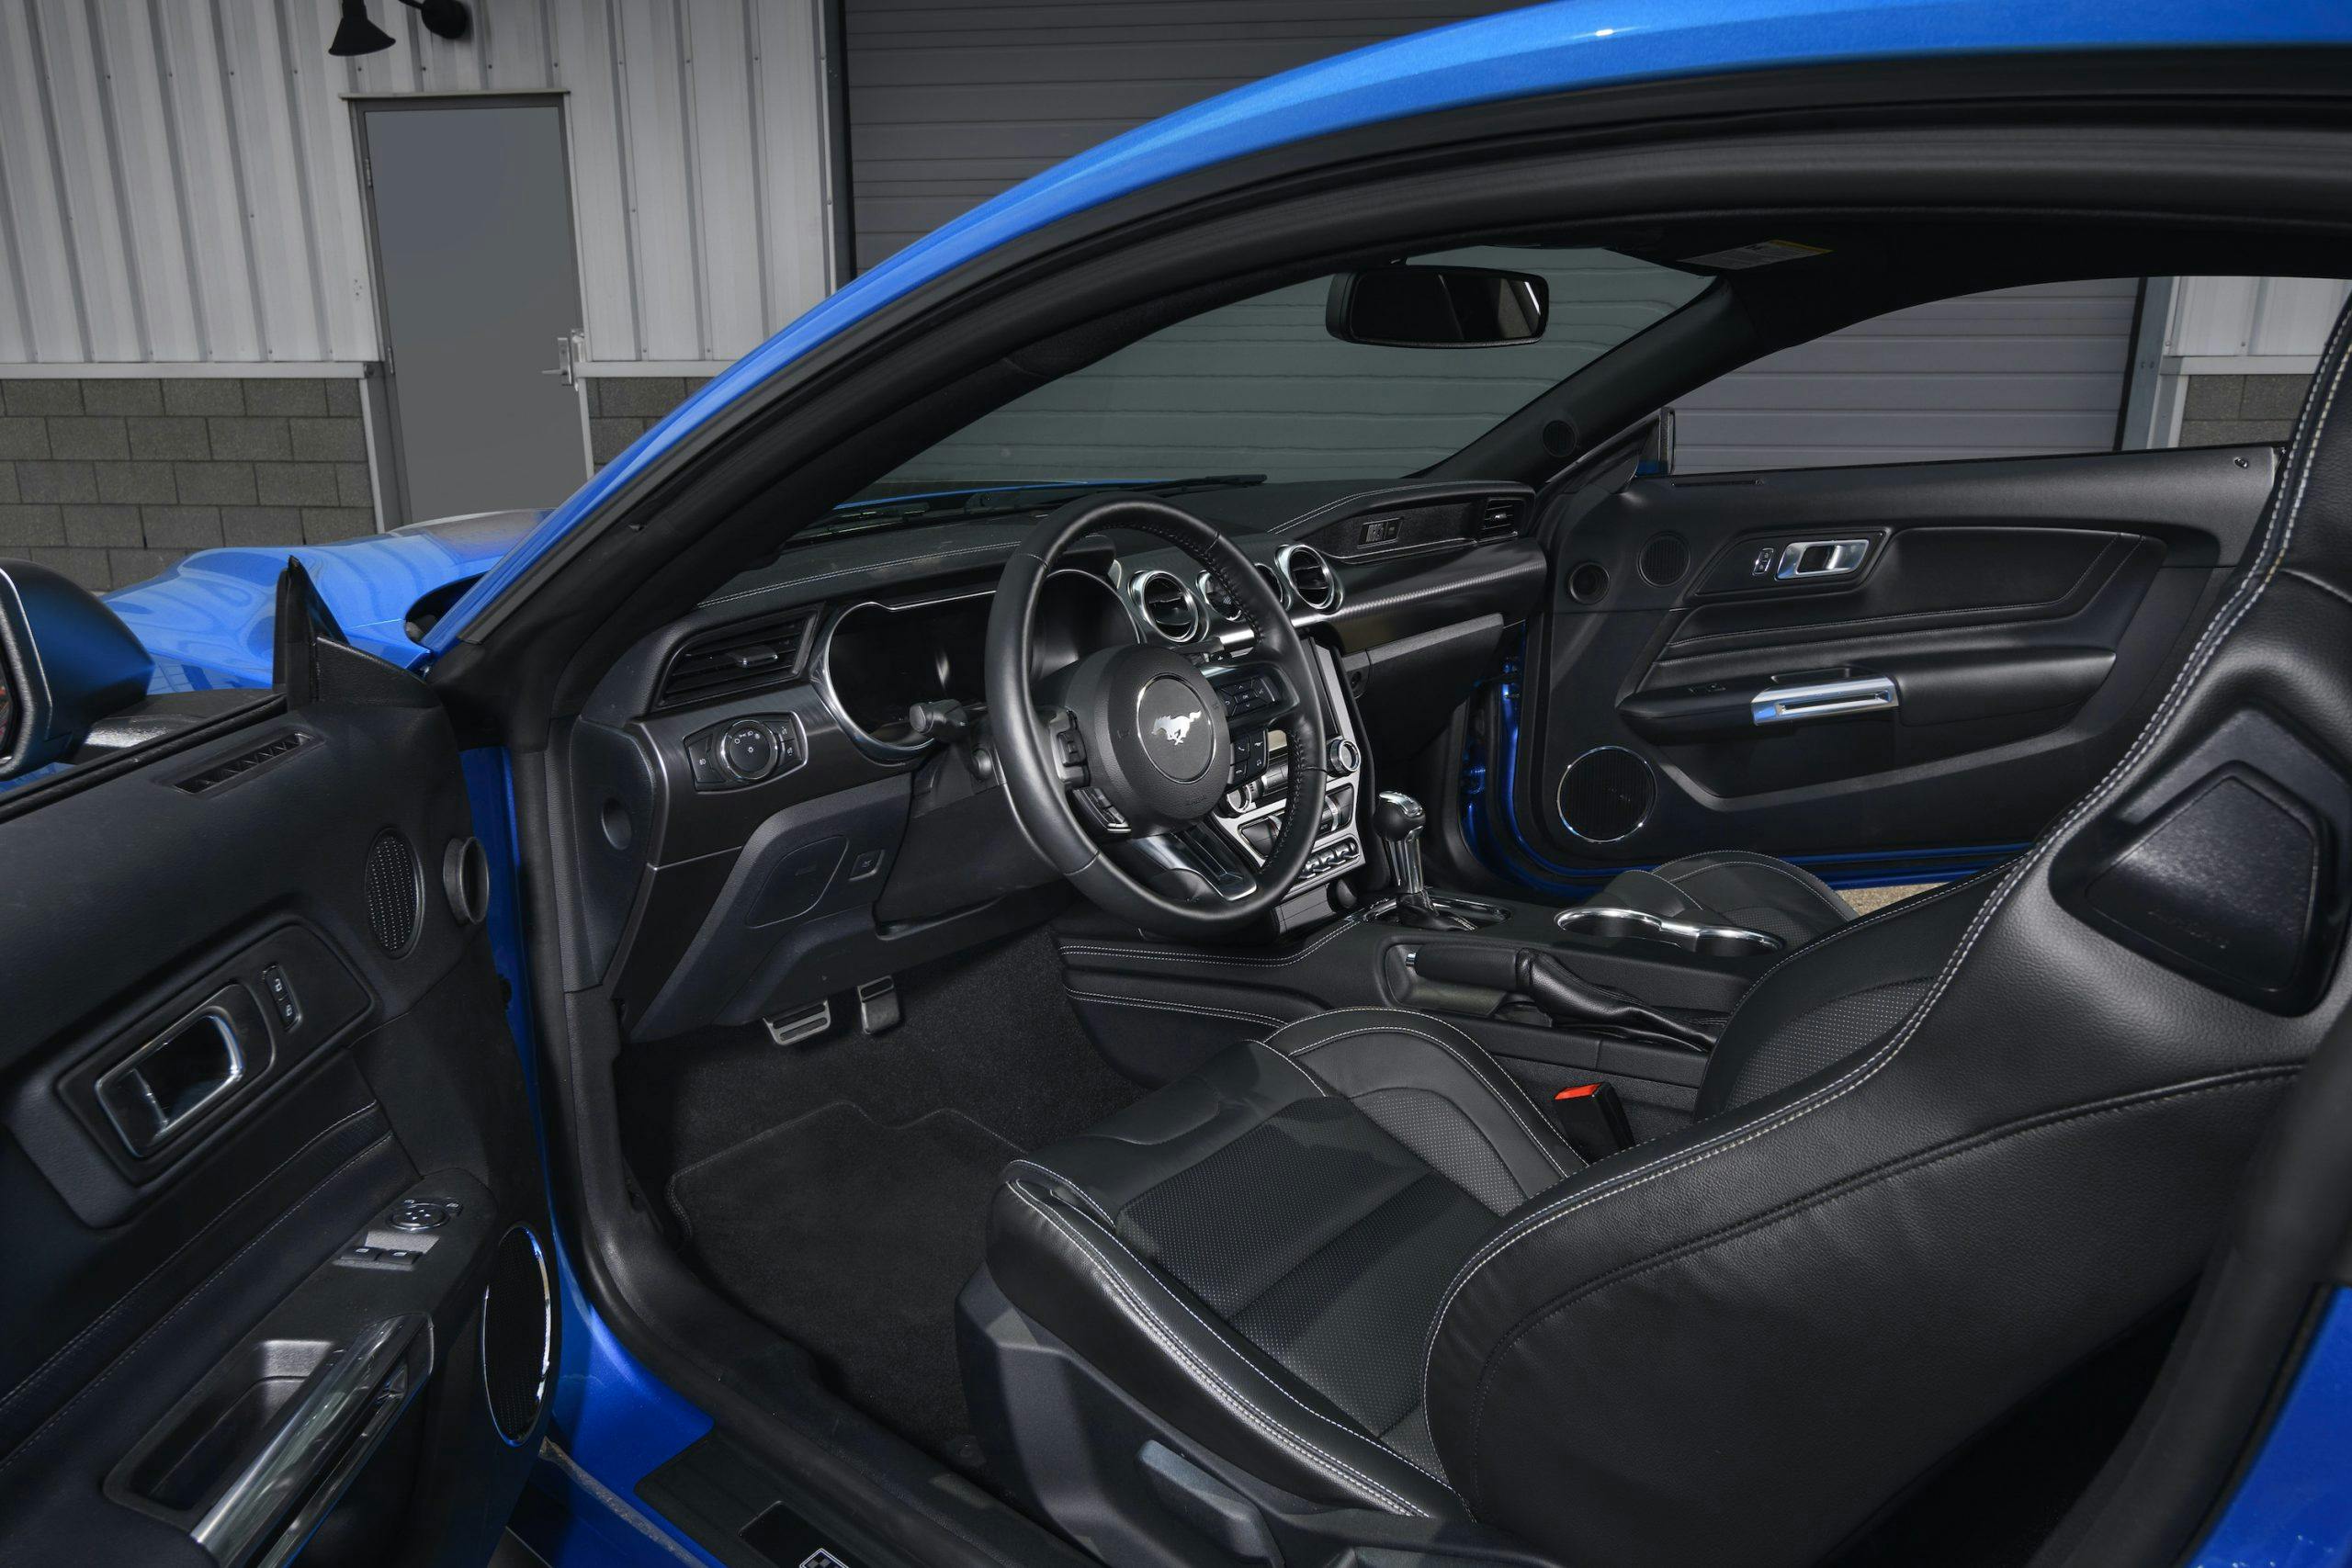 2021 Ford Mustang Mach 1 interior